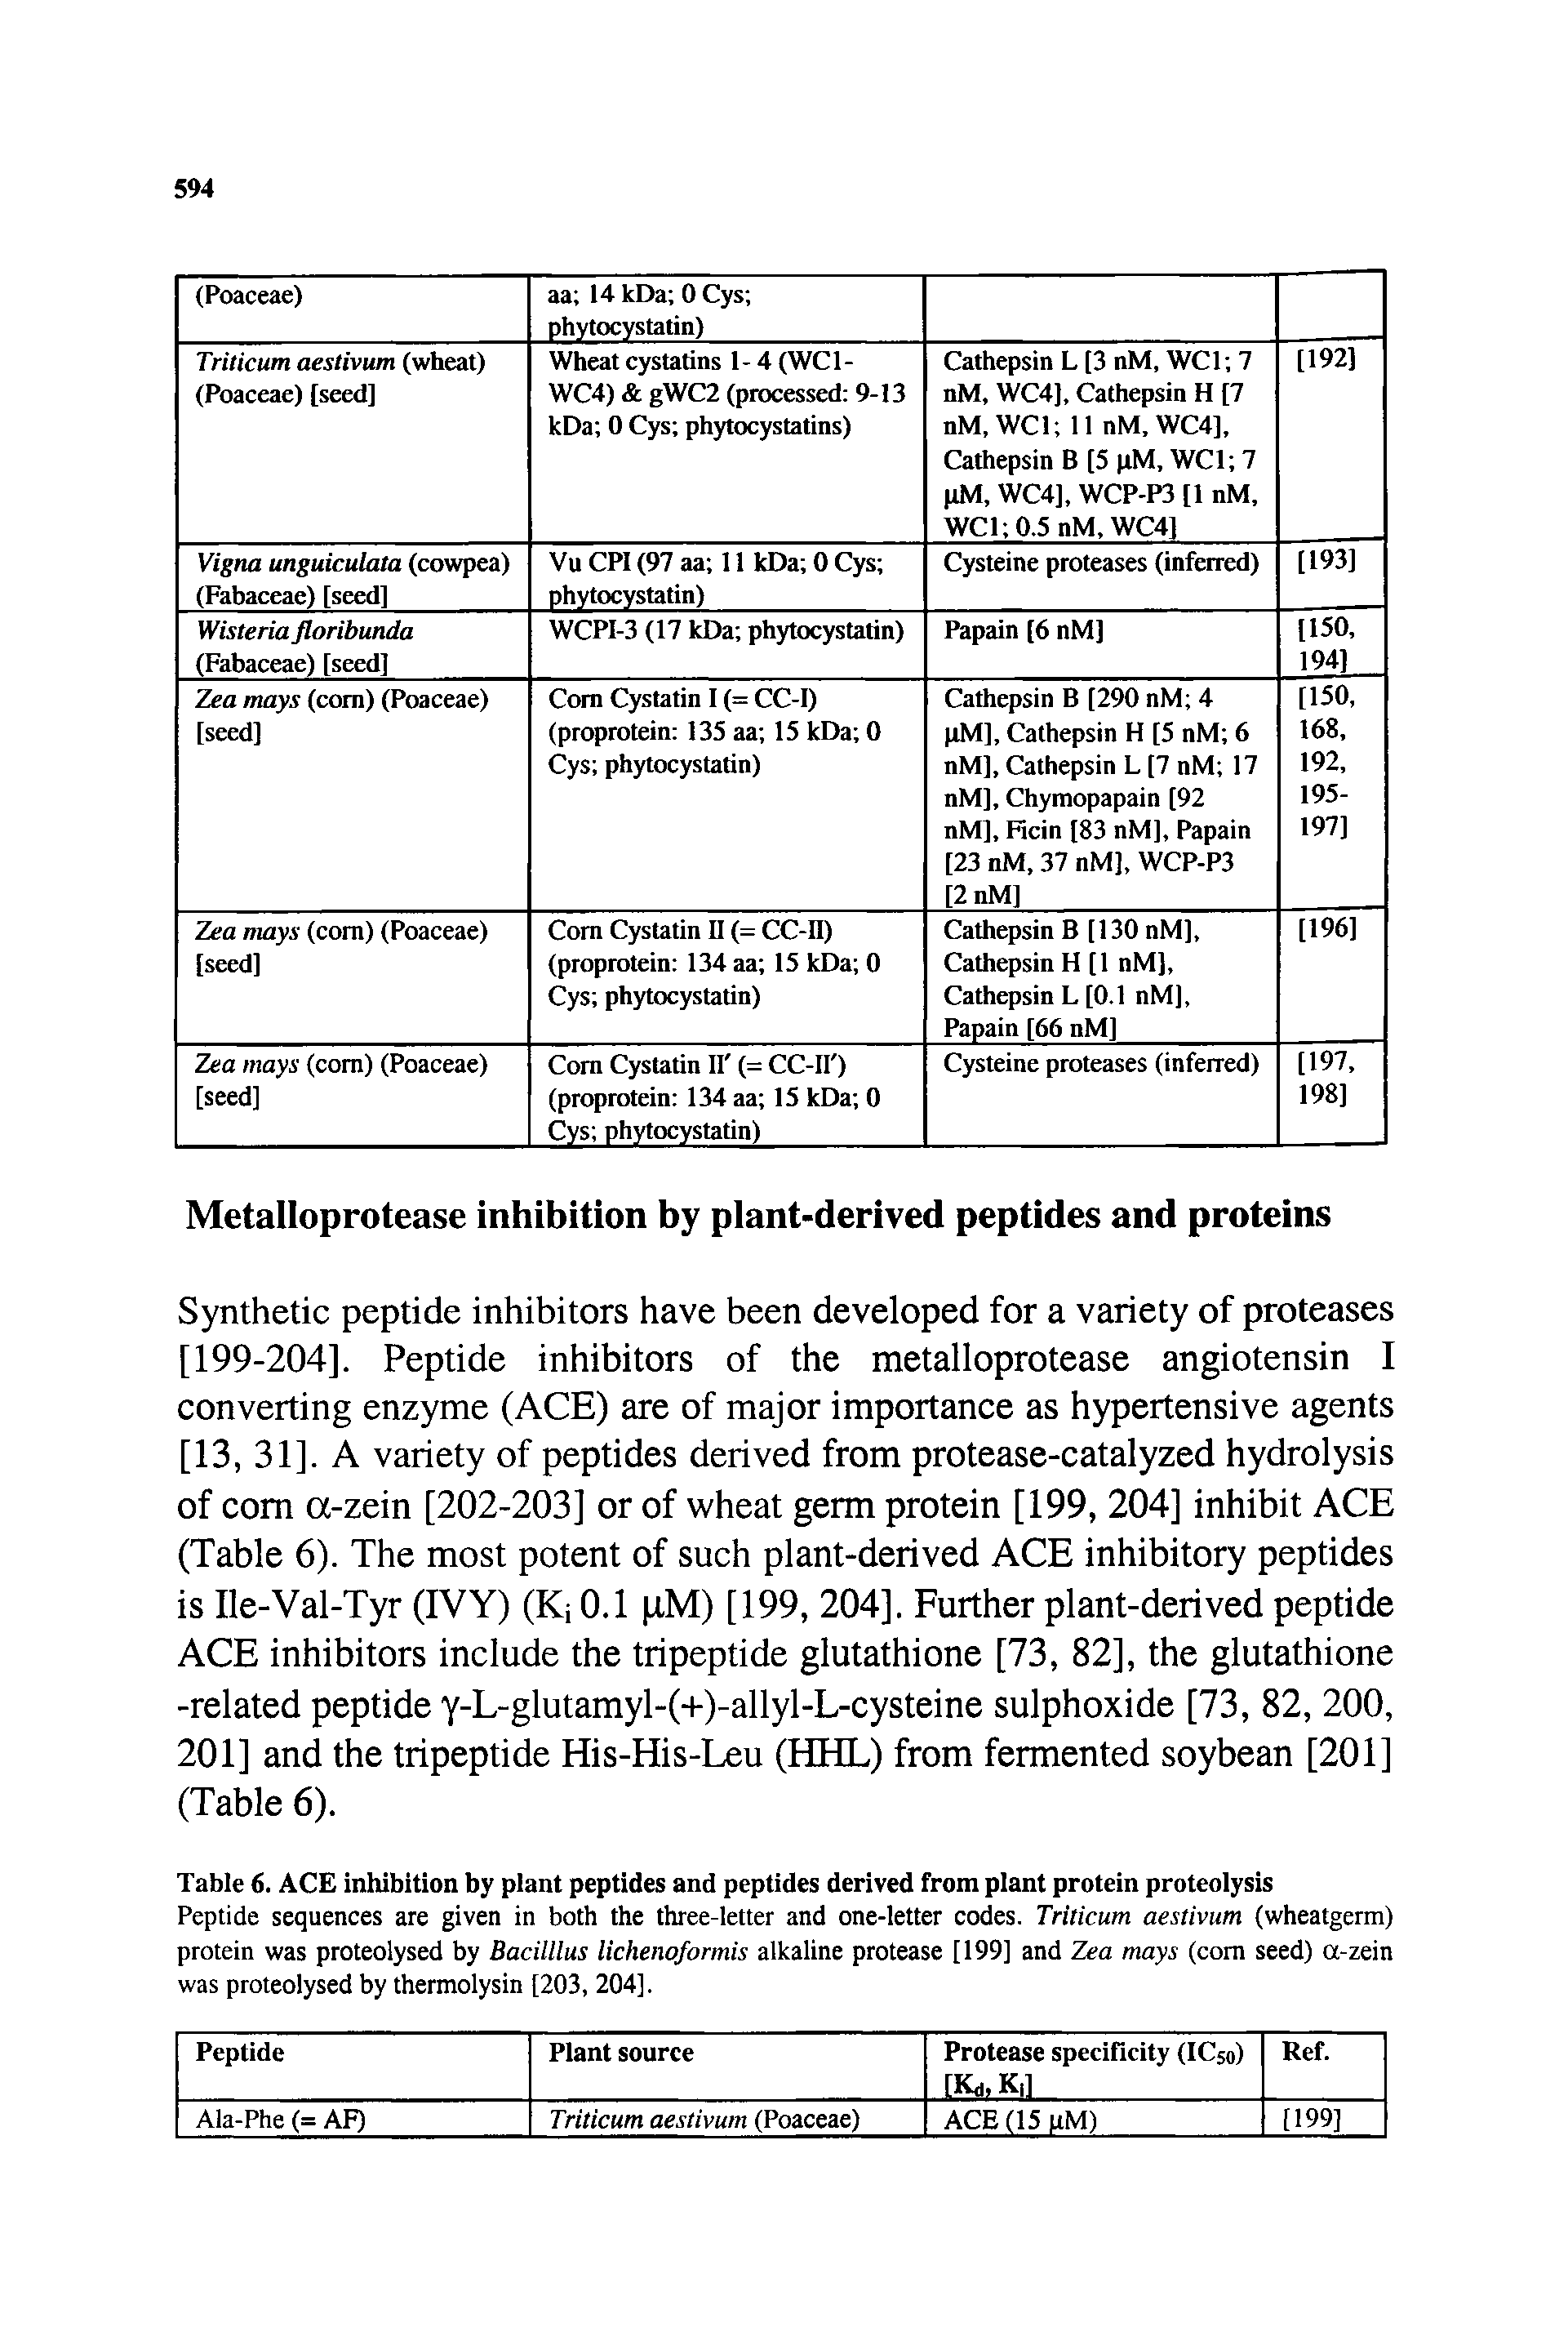 Table 6. ACE inhibition by plant peptides and peptides derived from plant protein proteolysis Peptide sequences are given in both the three-letter and one-letter codes. Triticum aestivum (wheatgerm) protein was proteolysed by Bacilllus lichenoformis alkaline protease [i99] and Zea mays (com seed) a-zein was proteolysed by thermolysin [203, 204],...